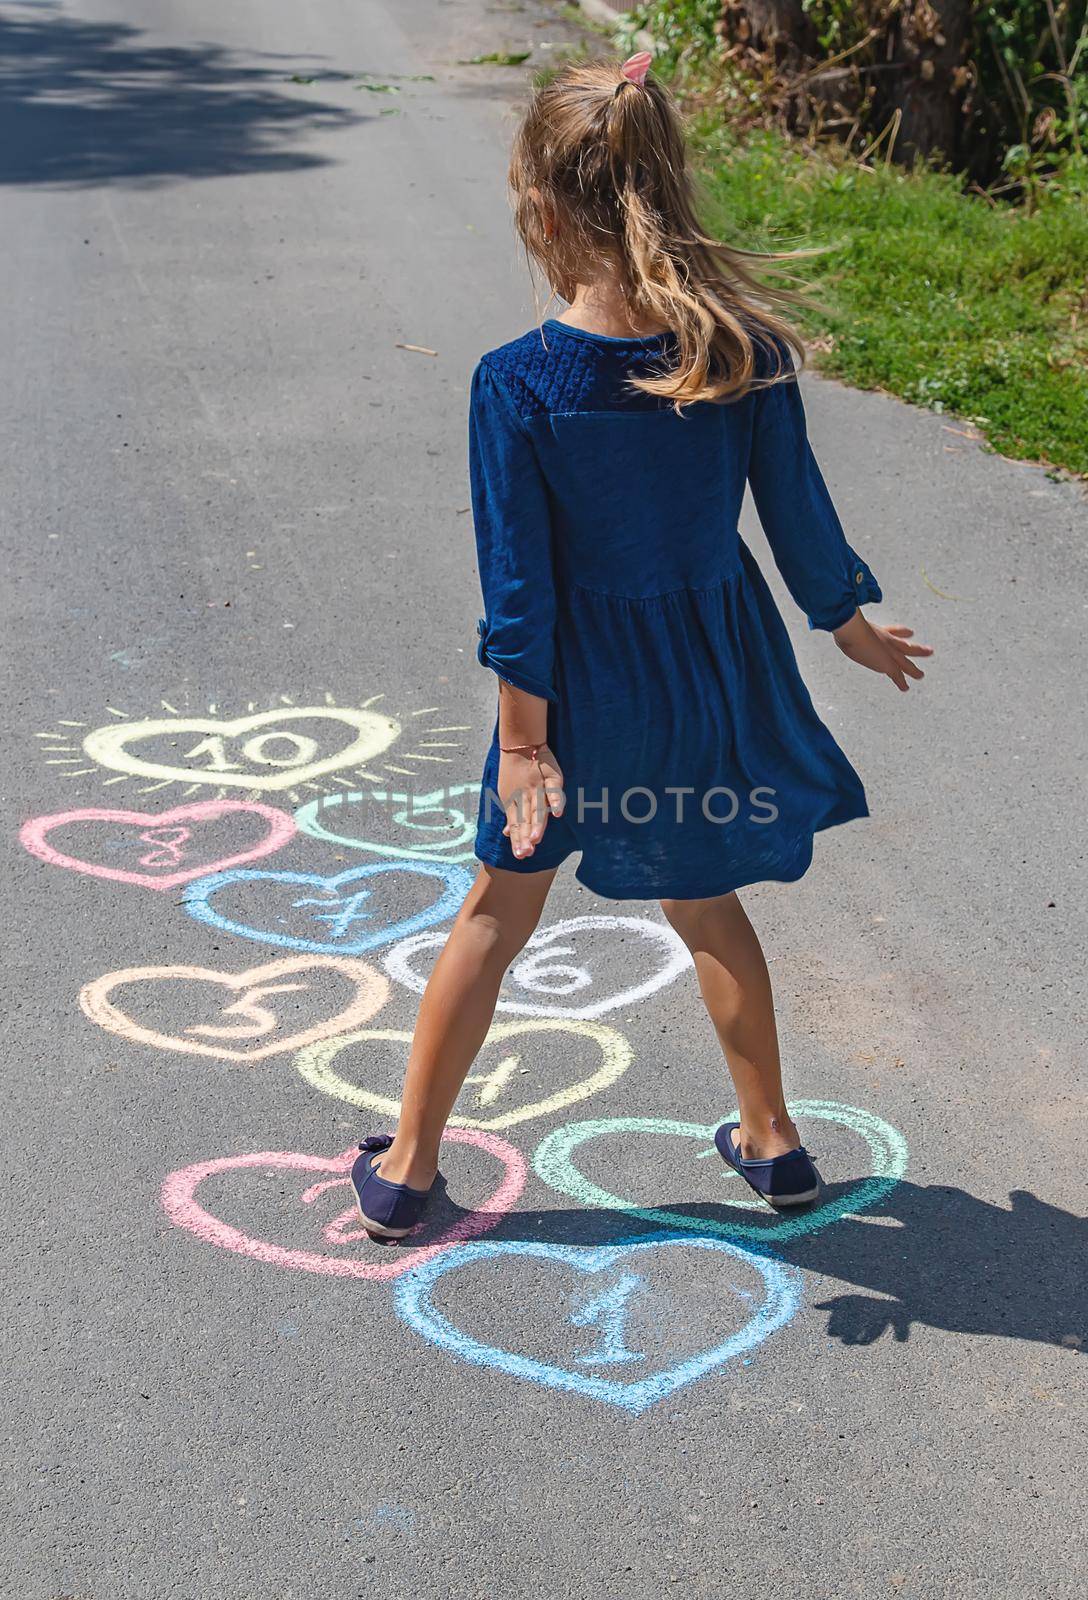 Children's hopscotch game on the pavement. selective focus. by yanadjana